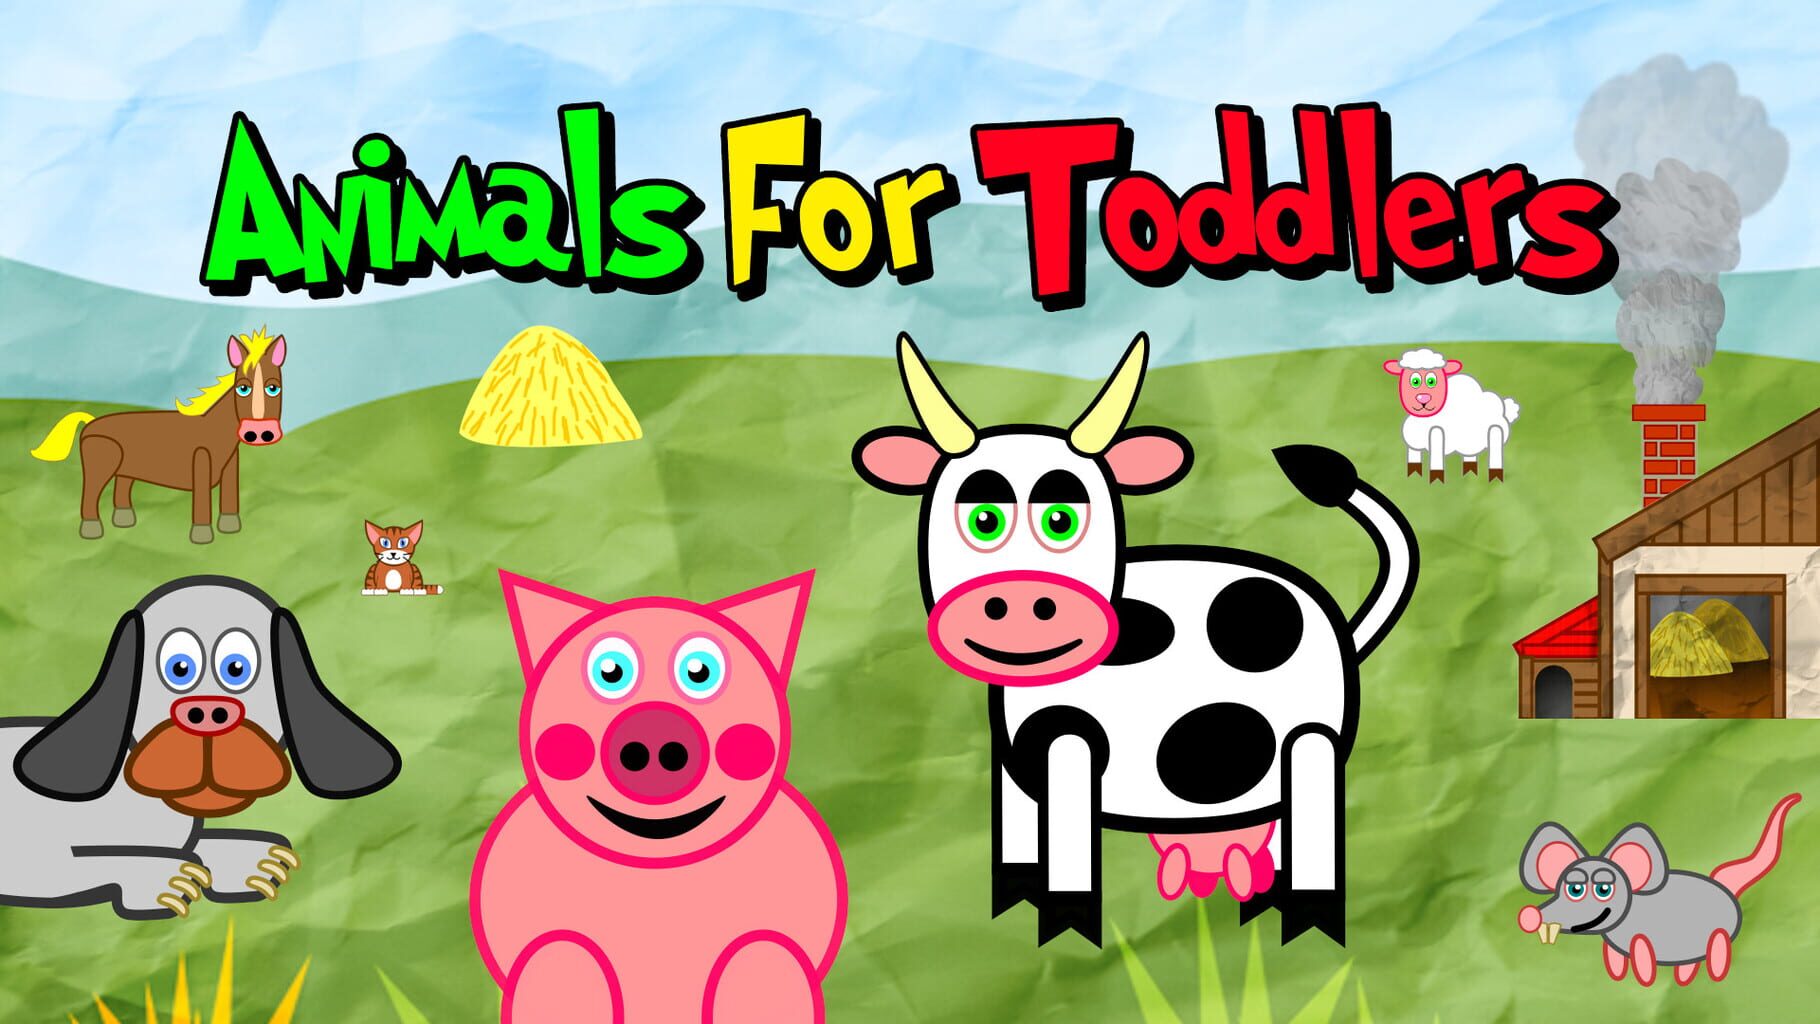 Animals for Toddlers artwork